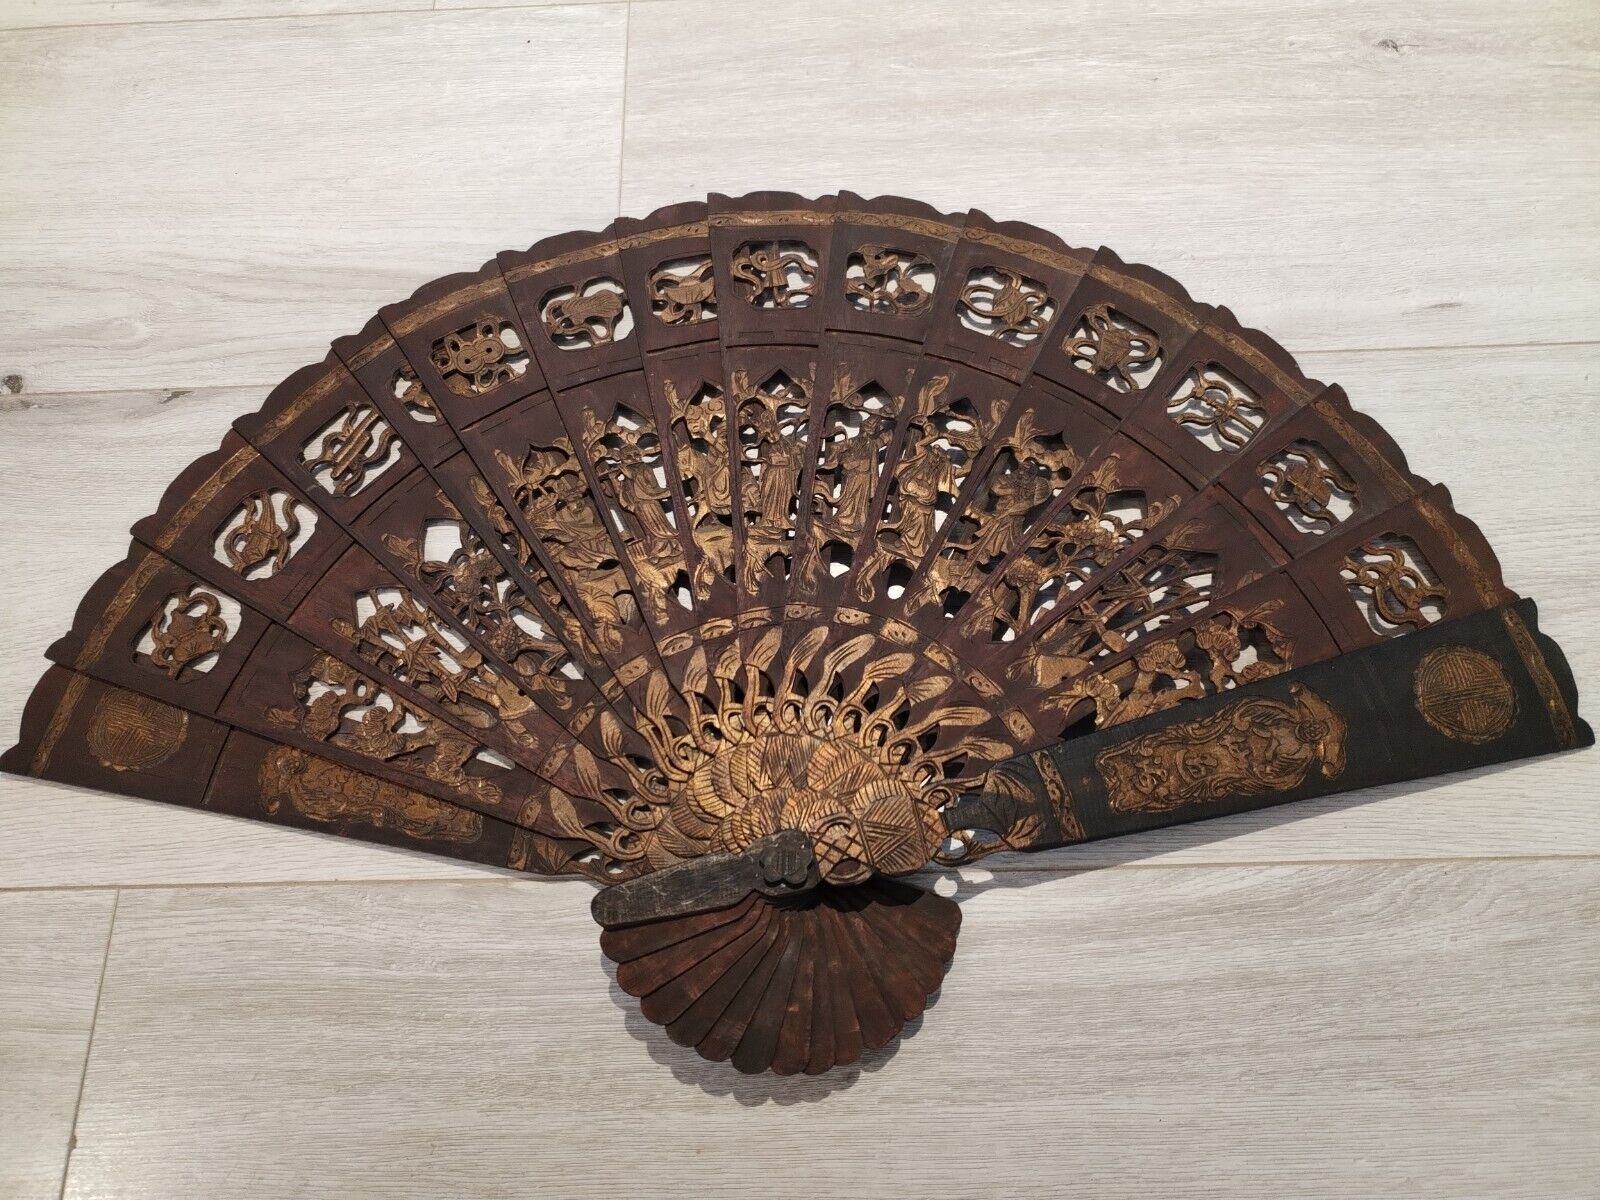 Chinese antique/vintage wooden fan. Rare and beautiful.